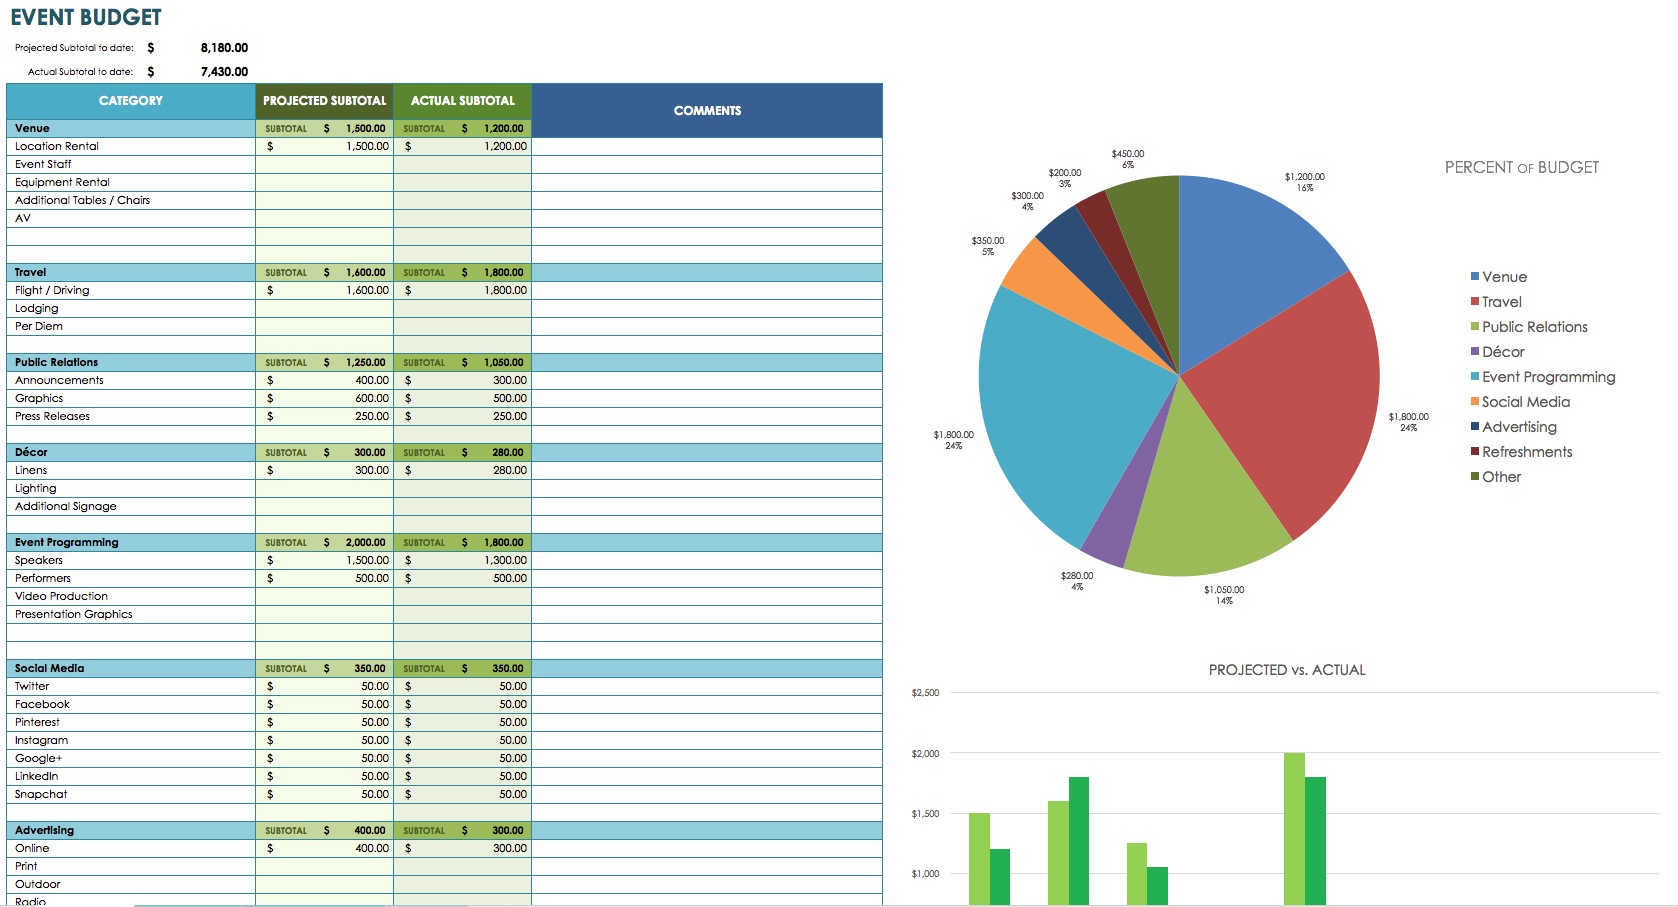 market research excel template